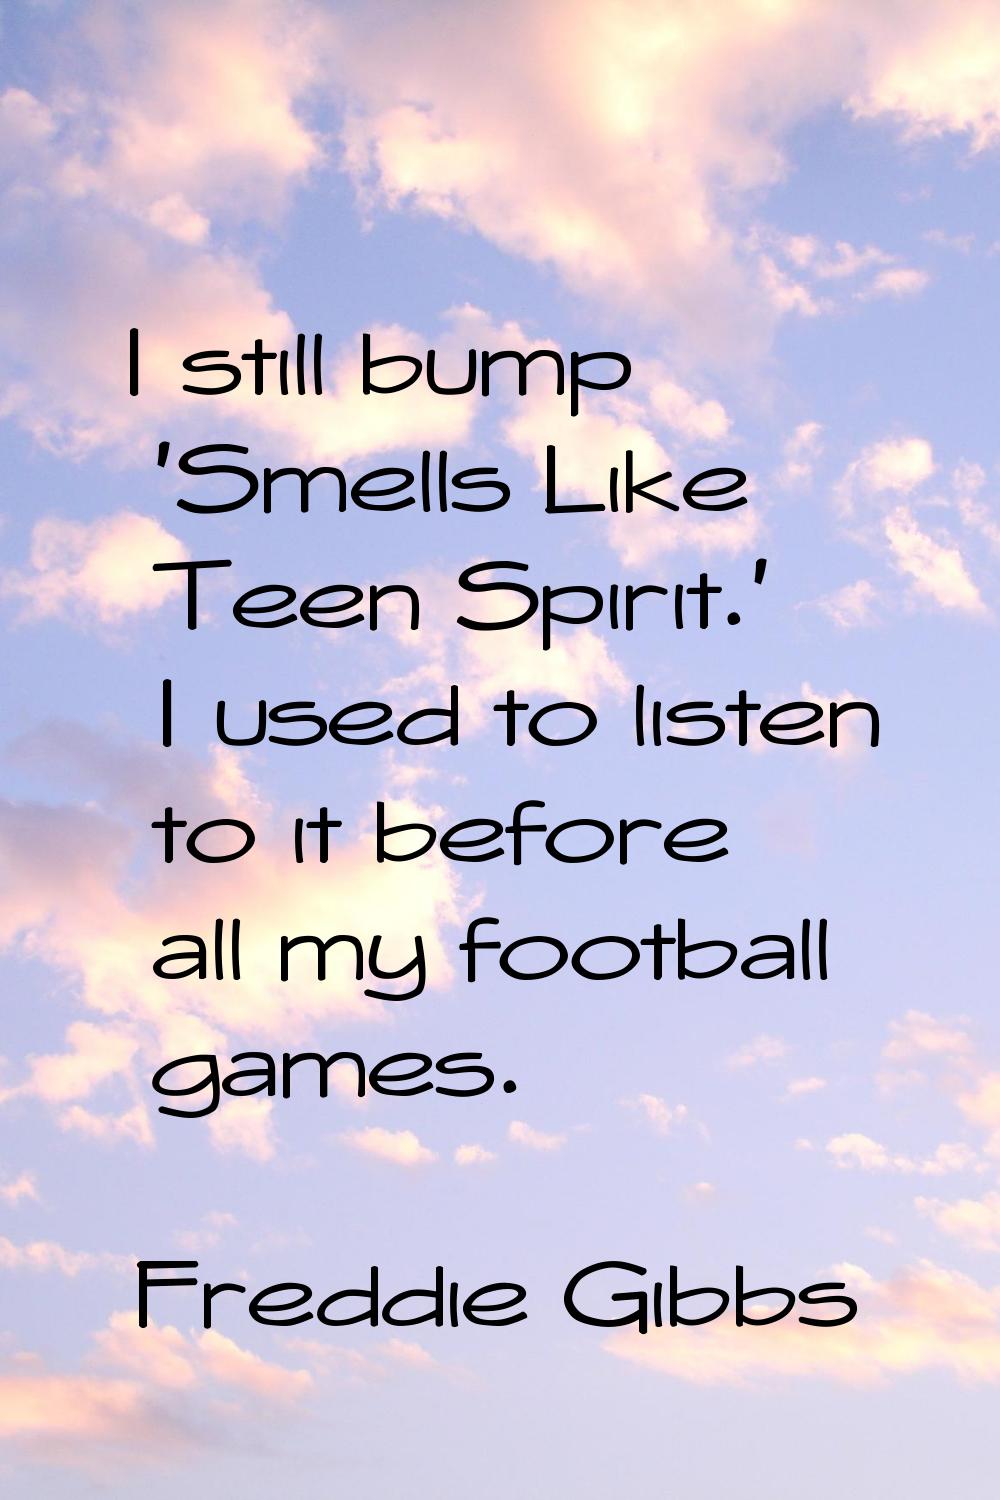 I still bump 'Smells Like Teen Spirit.' I used to listen to it before all my football games.